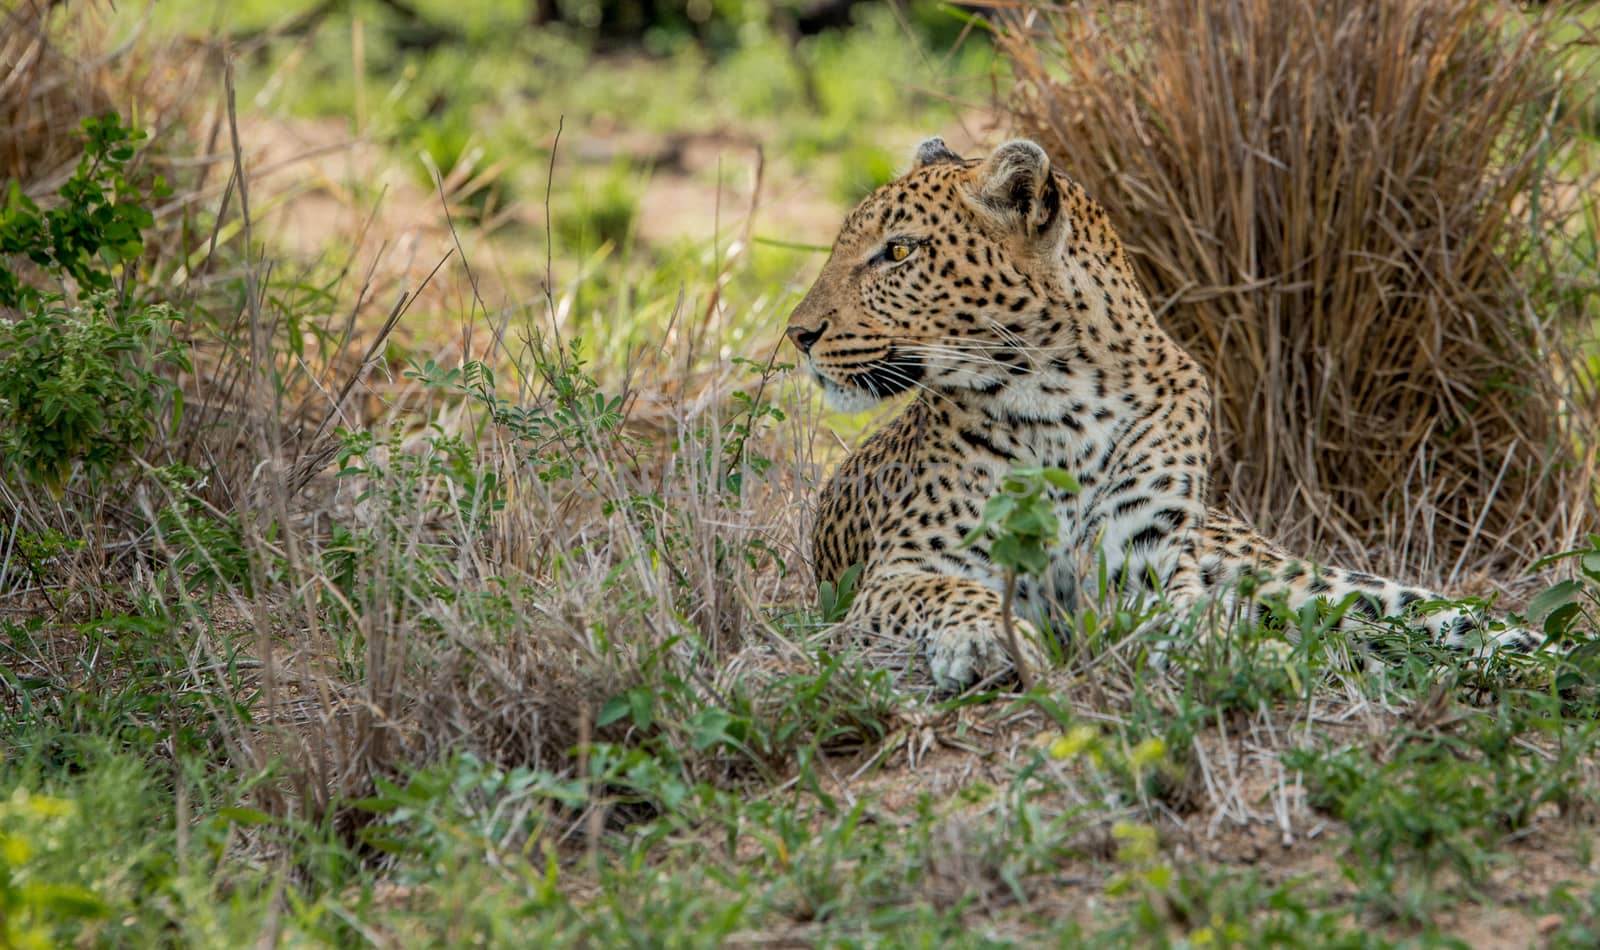 Laying Leopard in the Kruger National Park, South Africa. by Simoneemanphotography